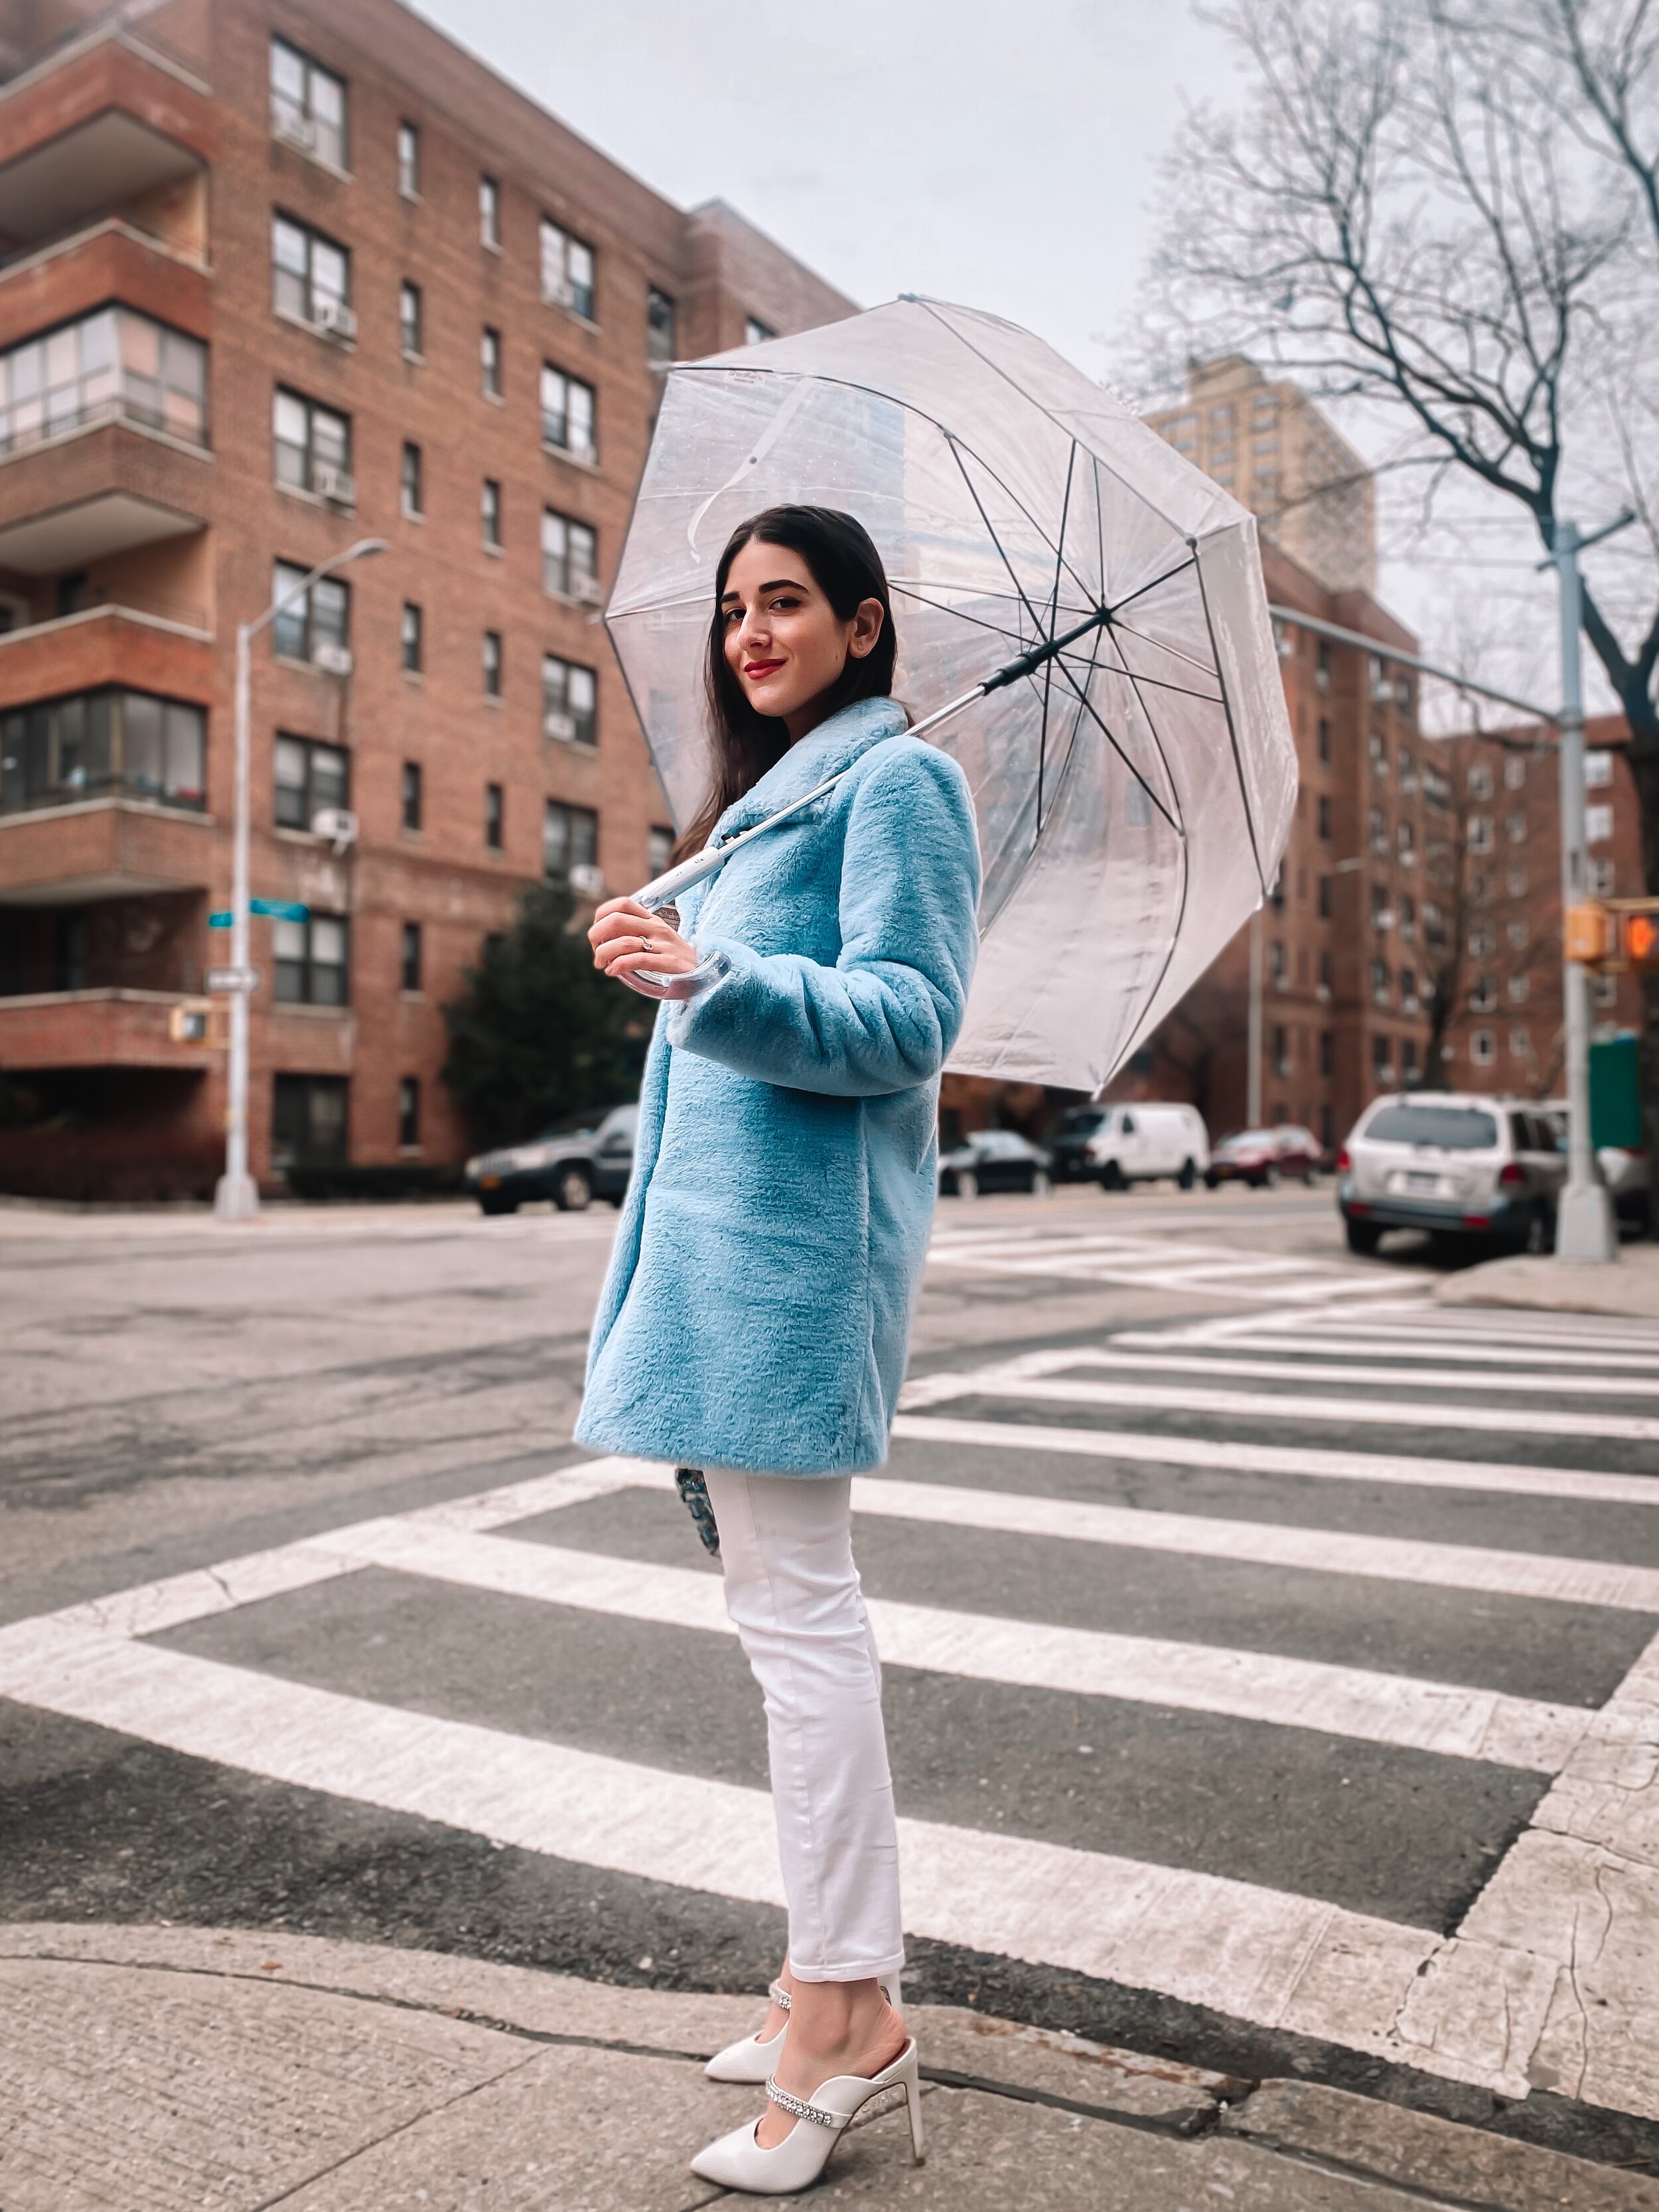 Esther Santer NYC Street Style Fashion Blogger New York City What To Wear Casual Shop Buy Girl Women Baby Blue Faux Fur Coat Calvin Klein Target Clear Dome Umbrella White Jeans 7 For All Mankind Kurt Geiger Duke White Jewel Heels Tripod Photo Rainy.JPG